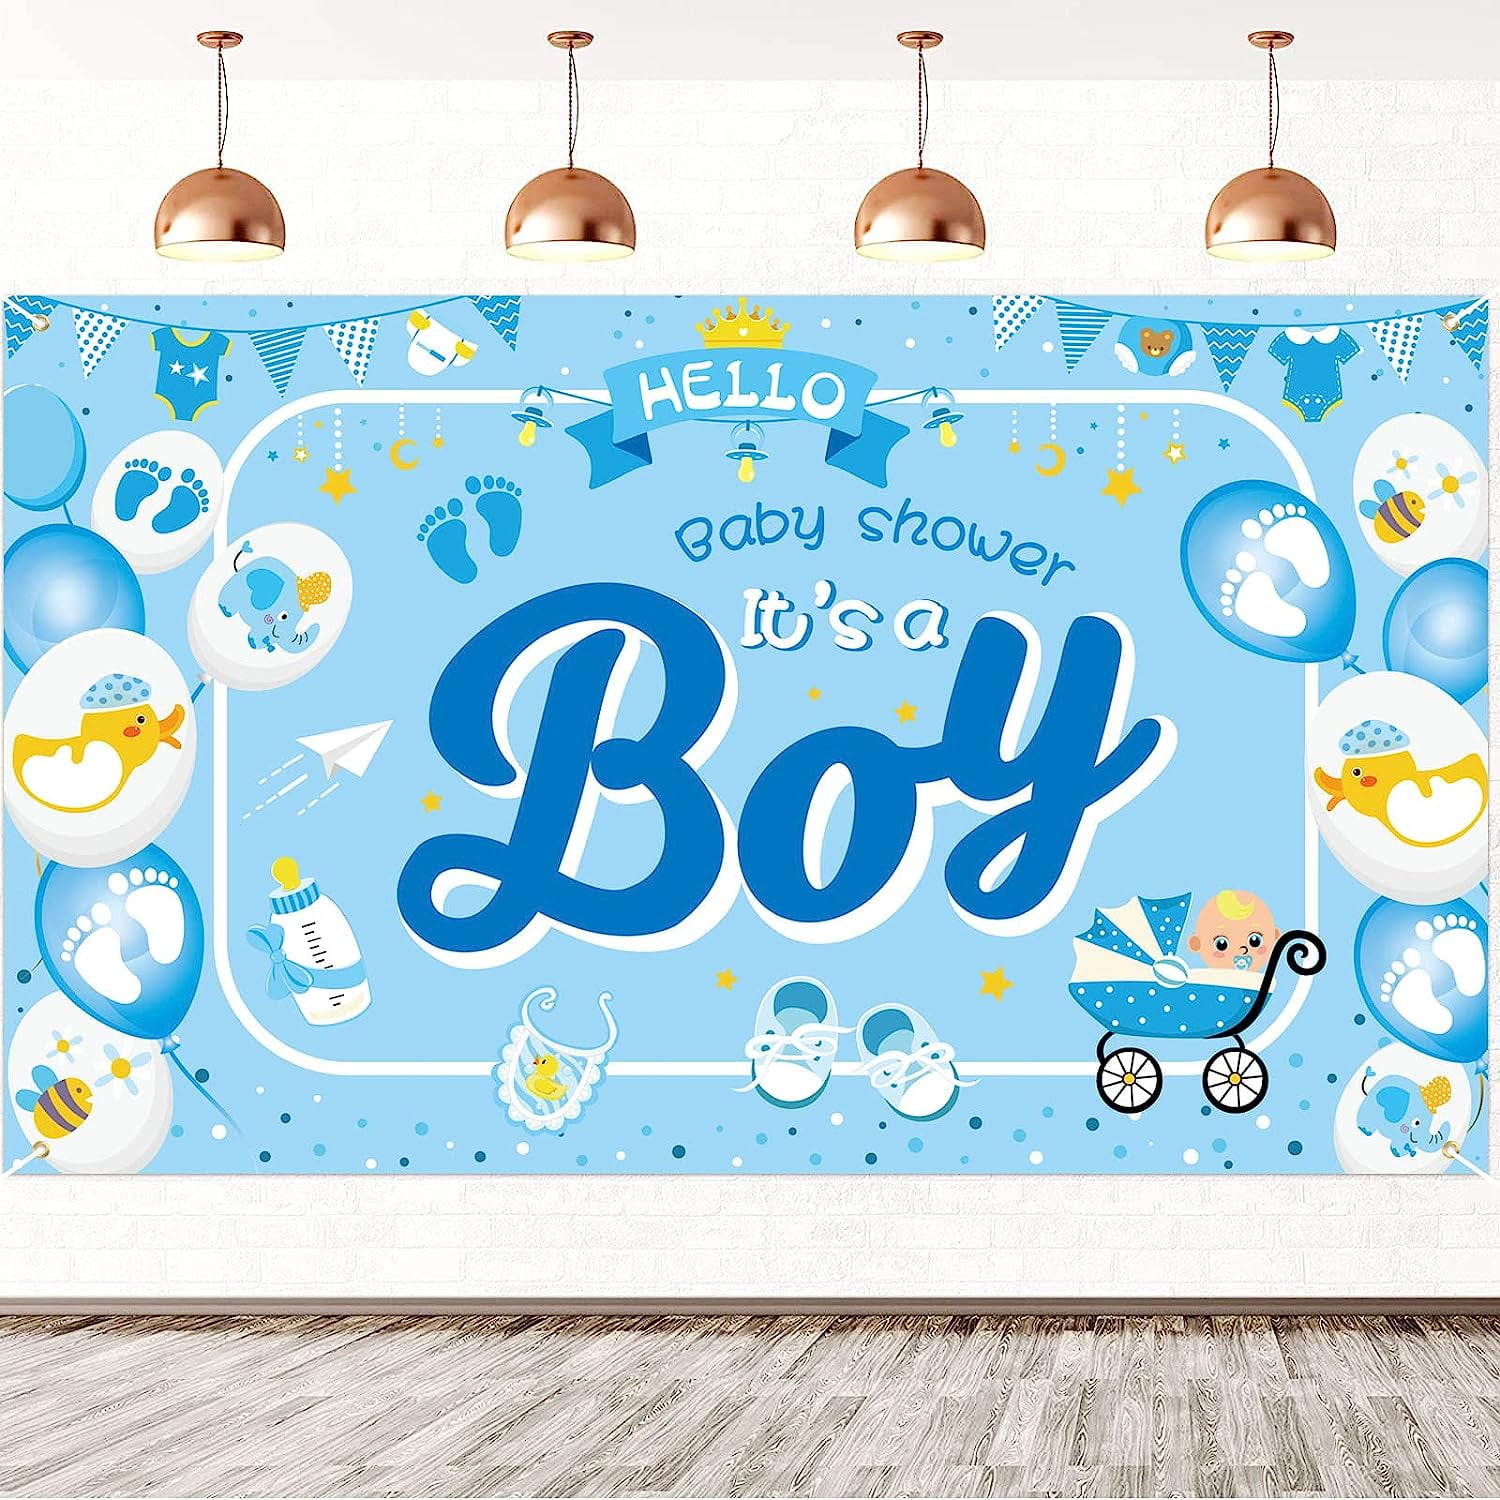  Sweet Baby Co. Classic Winnie the Pooh Baby Shower Decorations  for Girl or Boy with Vintage Welcome Sign Party Decoration Cupcake Toppers  Pooh Bear Backdrop Balloons Bumble Bee Honey Comb Sash